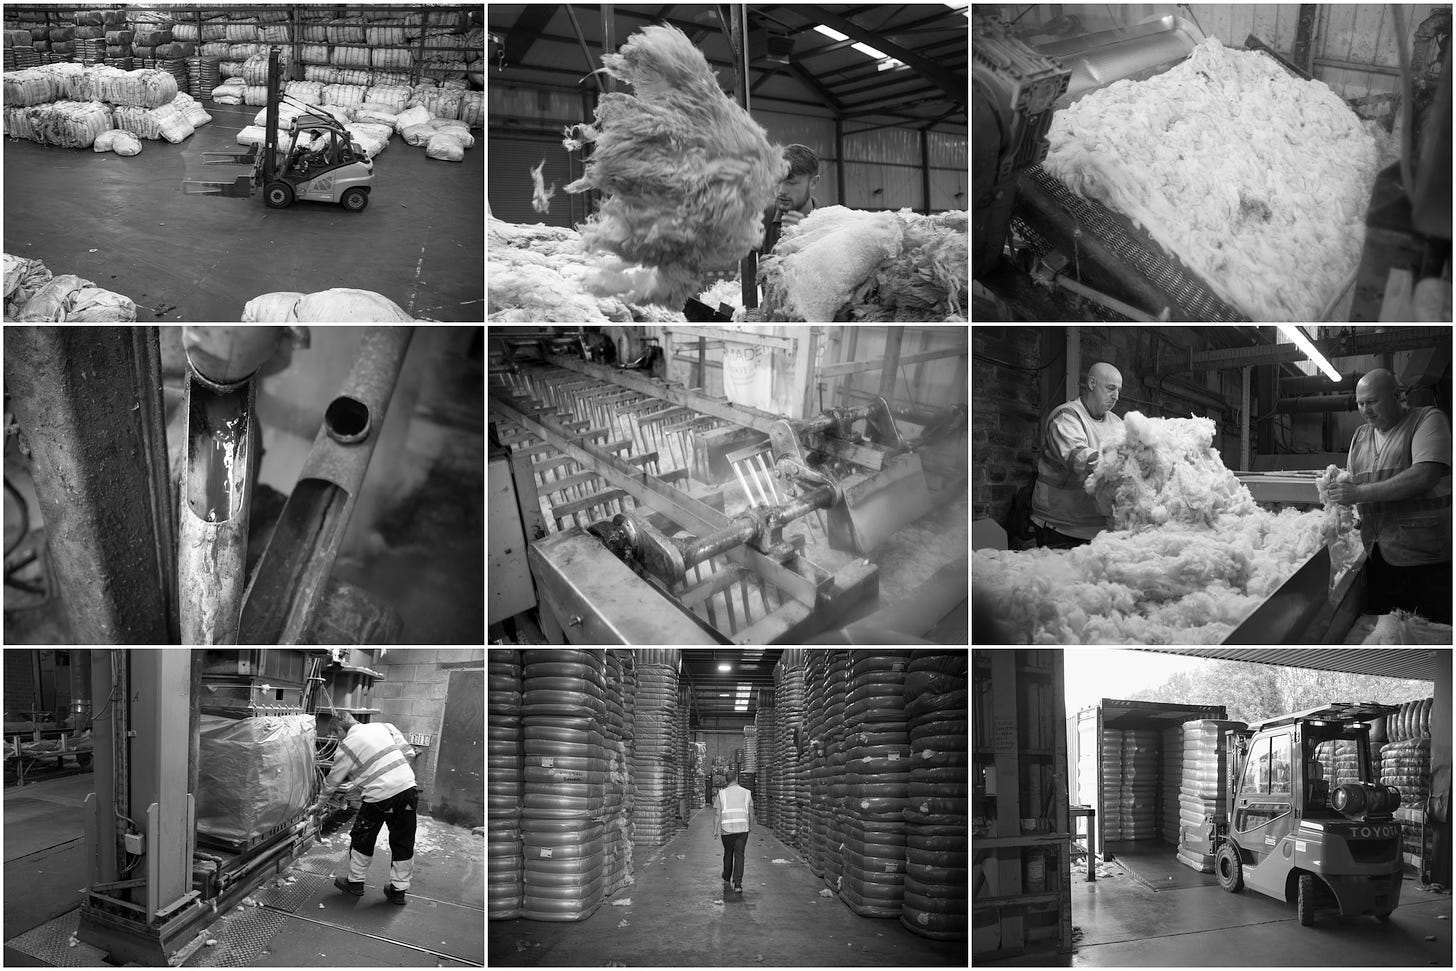 A nine image montage showing the grading and scouring process involved when getting wool ready to be used in a wool duvet. Graders sort the wool and can differentiate from over 100 types.  It then travels from the feeding belt,  through the wool opening machines, and then the scour line consisting of five washing bowls before being dried and blown onto the picking table for final inspection. It is then bailed before being sent to Baavet to be carded and quilted in a fine cotton cover to become a Baavet wool duvet.